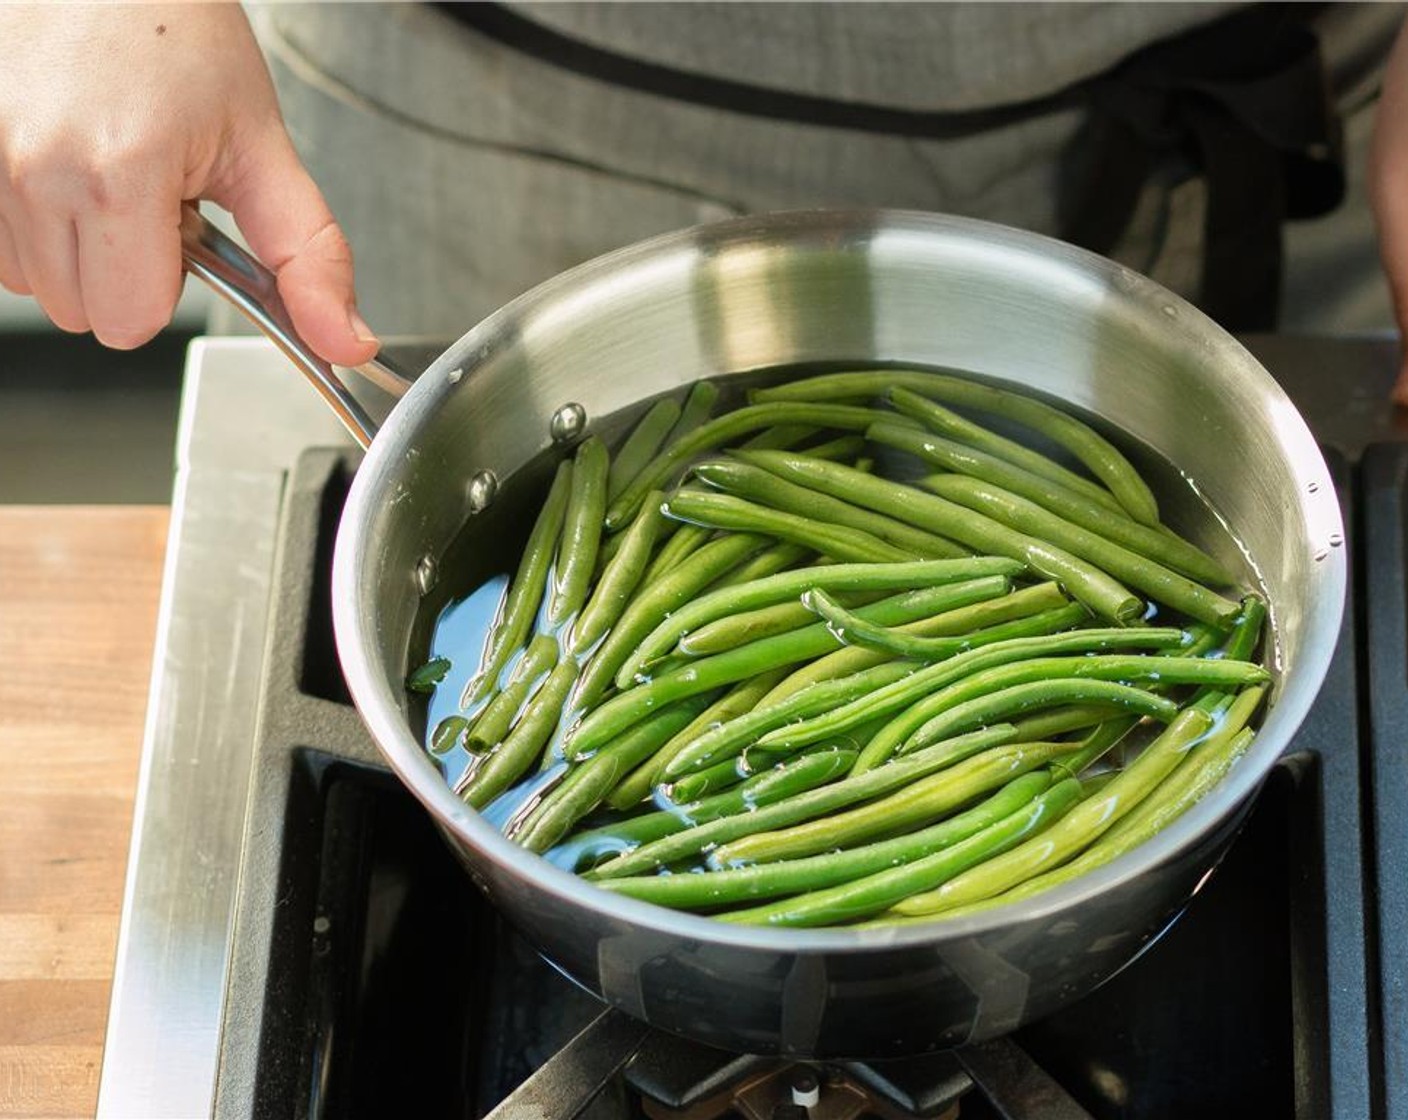 step 13 Increase the saucepot to high heat and boil the water. Once the water is boiling, trim the ends of the Green Beans (1 1/2 cups) and add to the sauce. Cook for 7 minutes, drain, and return to the saucepot.